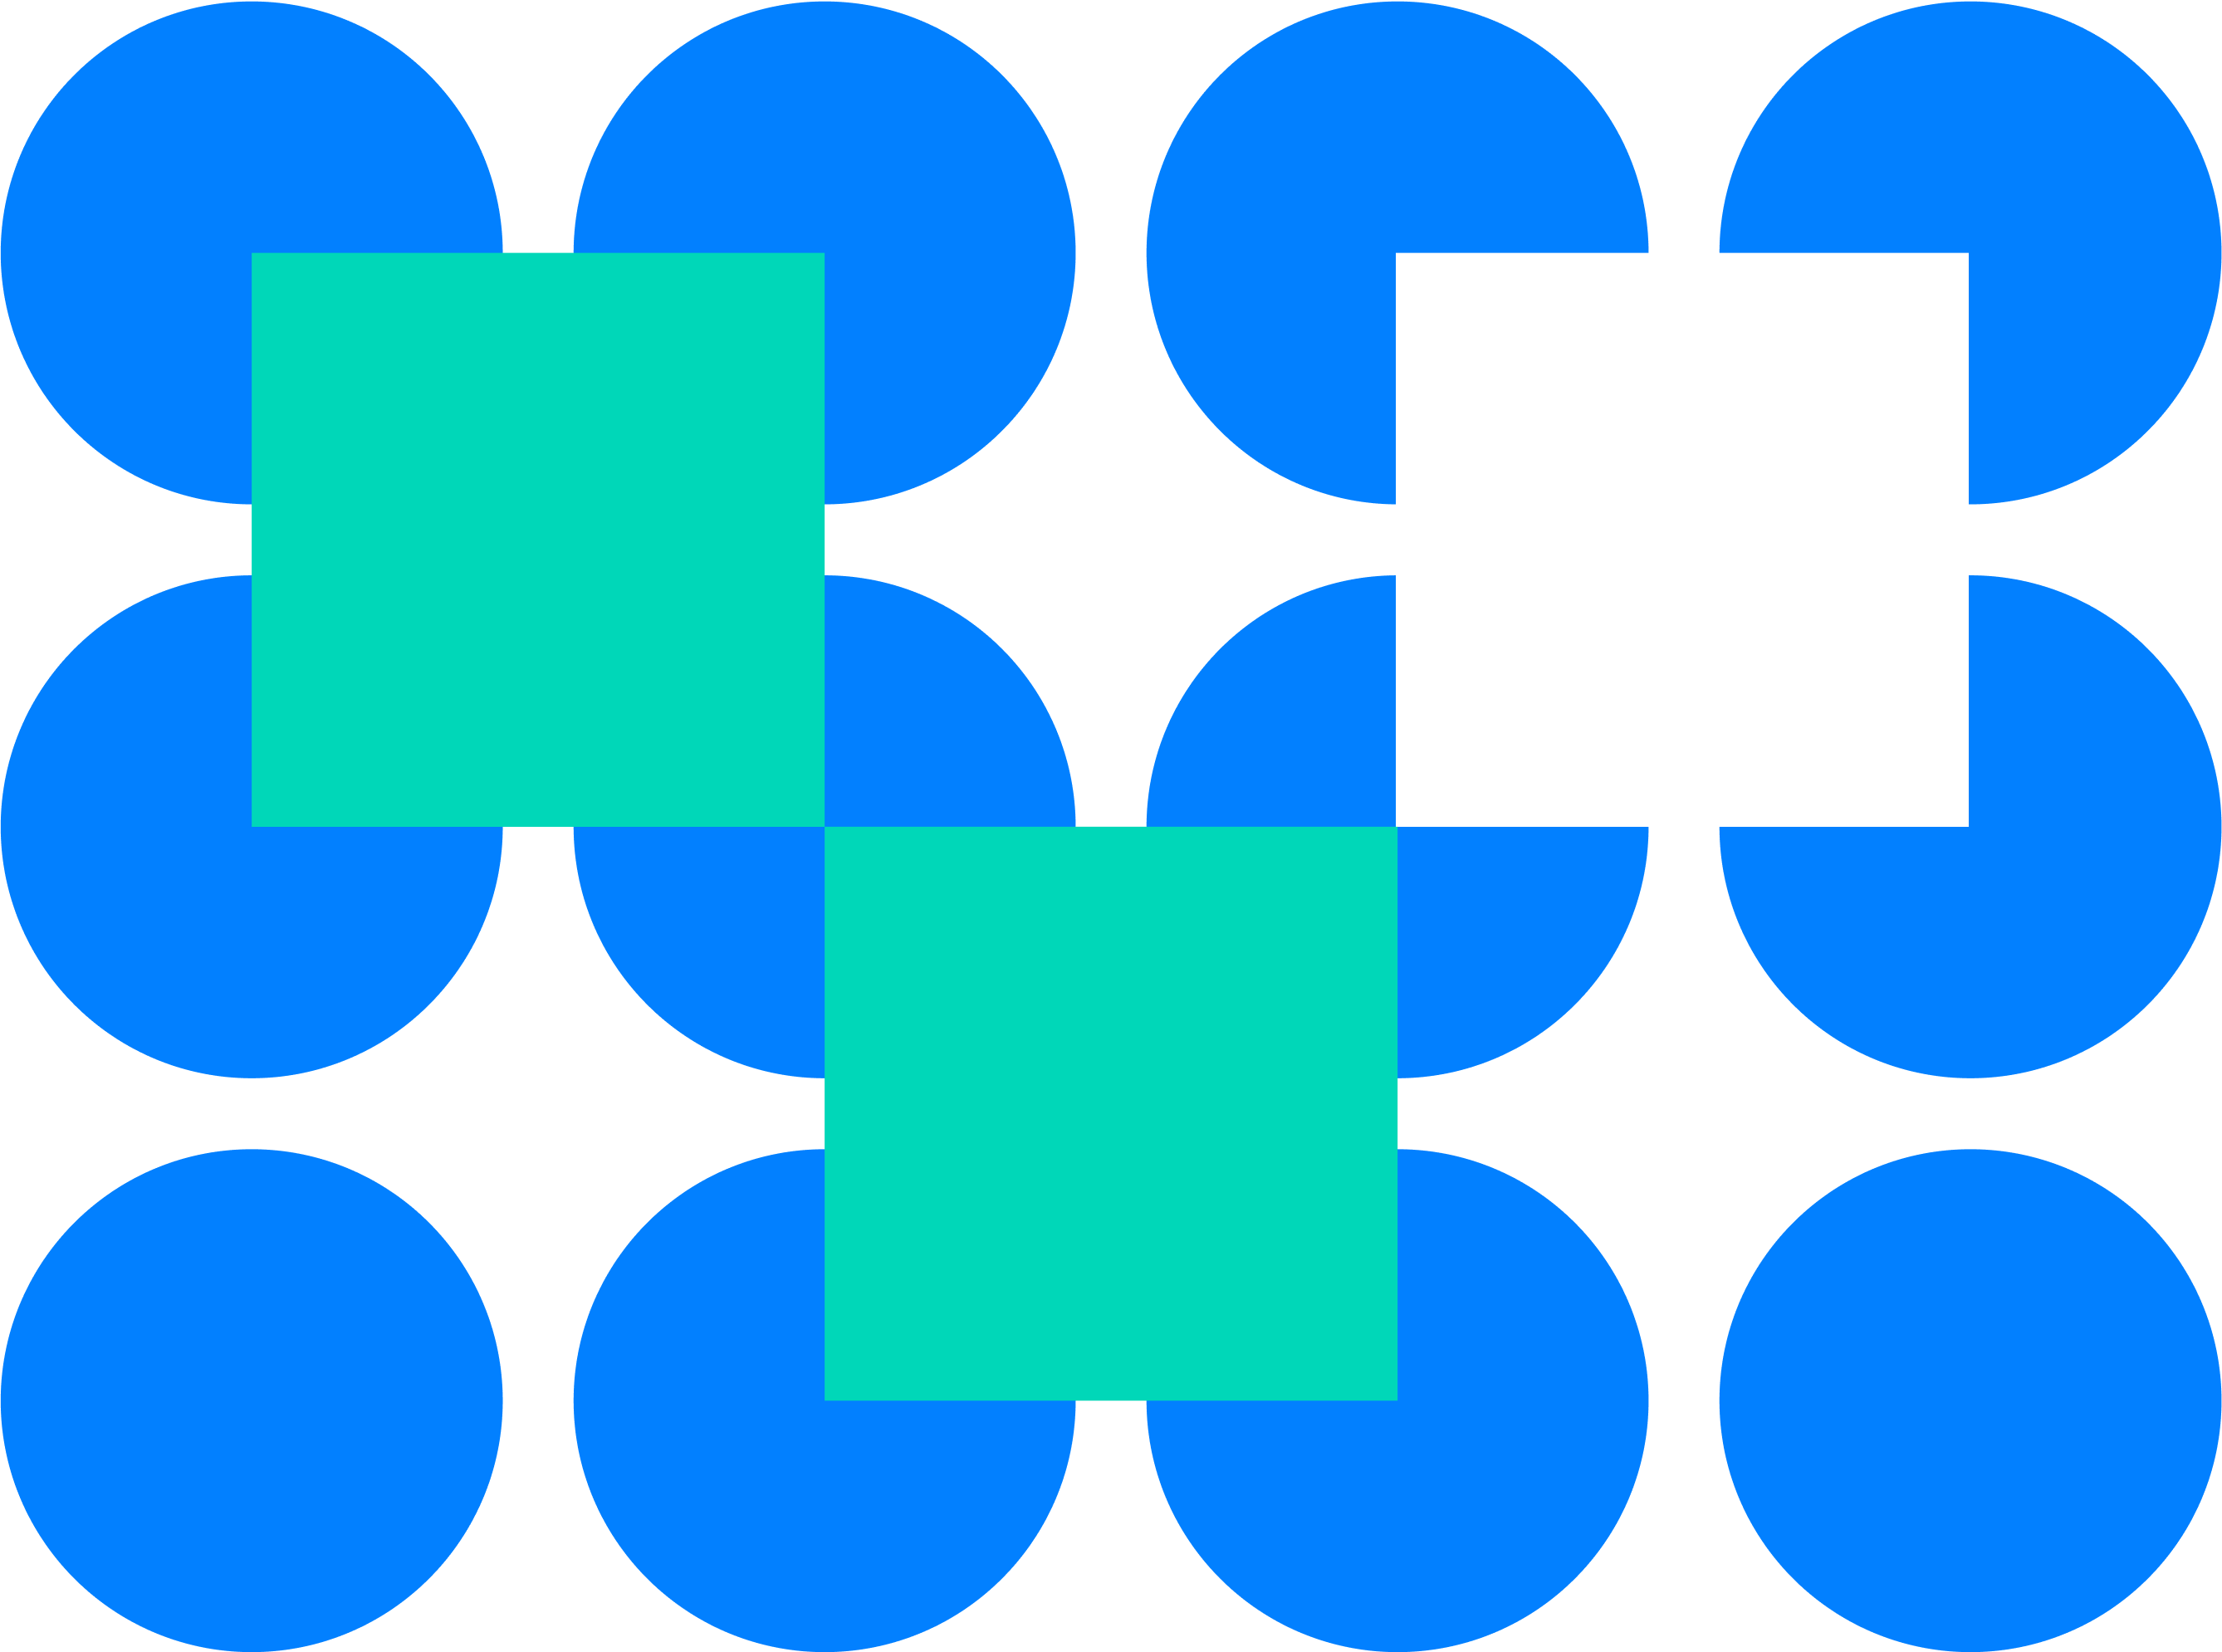 Graphic showing green and white squares overlapping a grid of blue circles